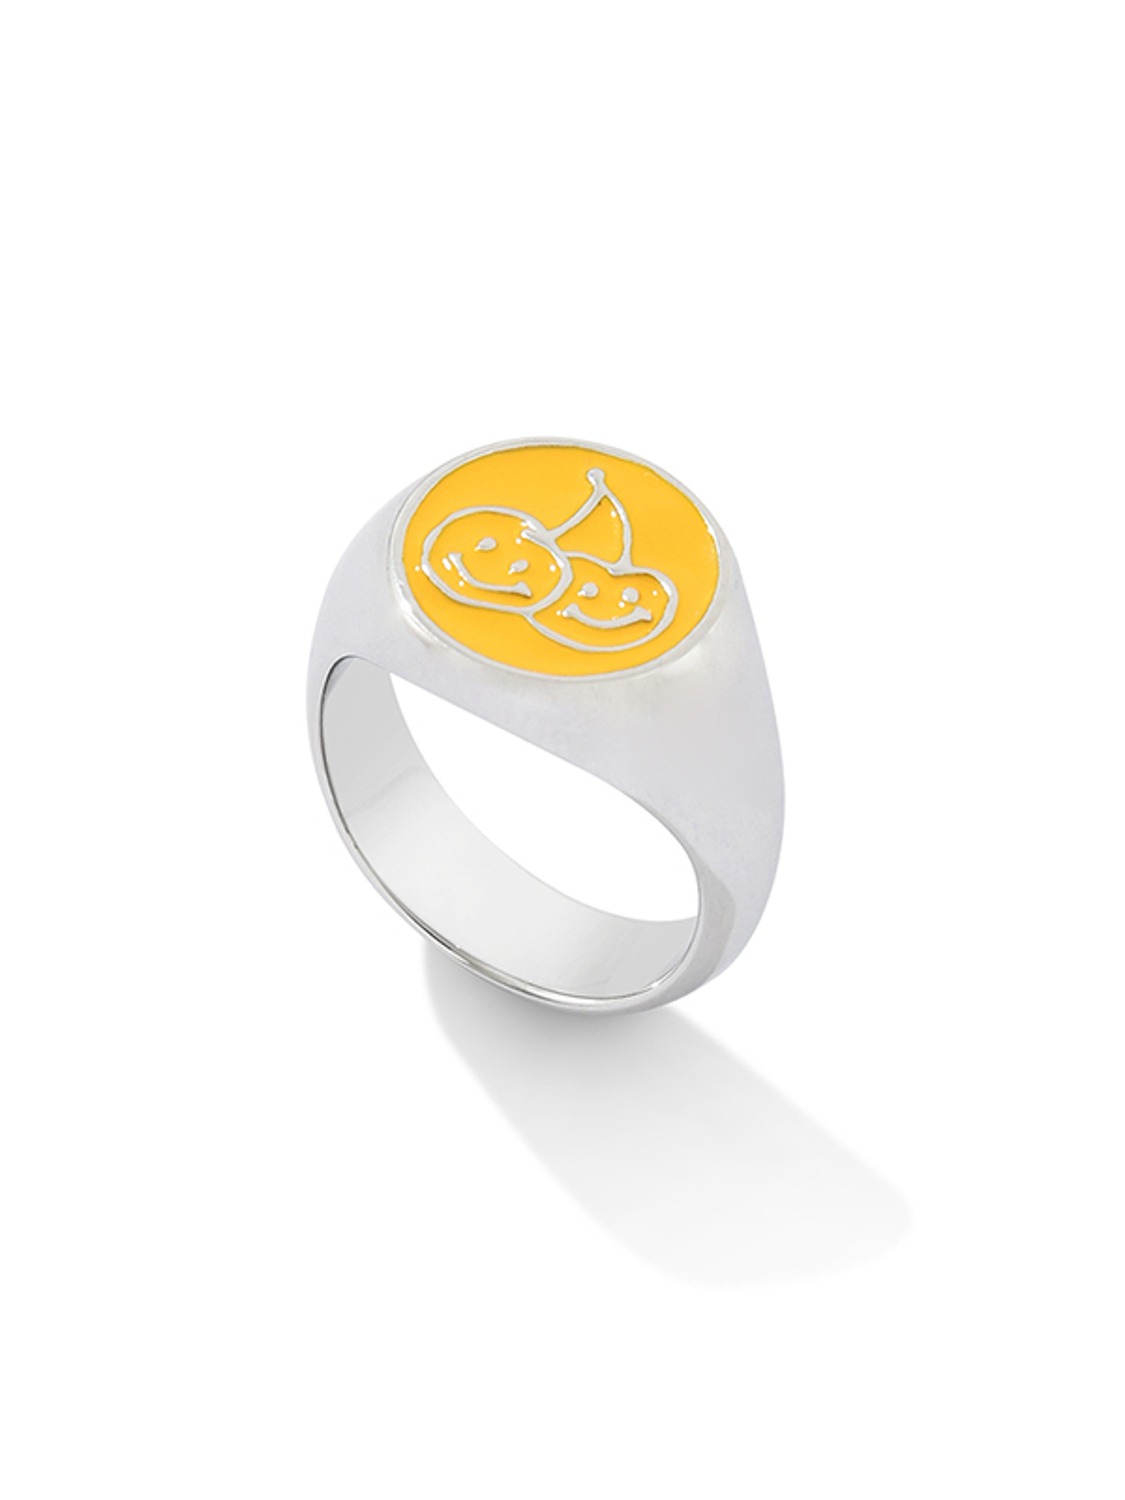 DOODLE CHERRY RING [YELLOW]